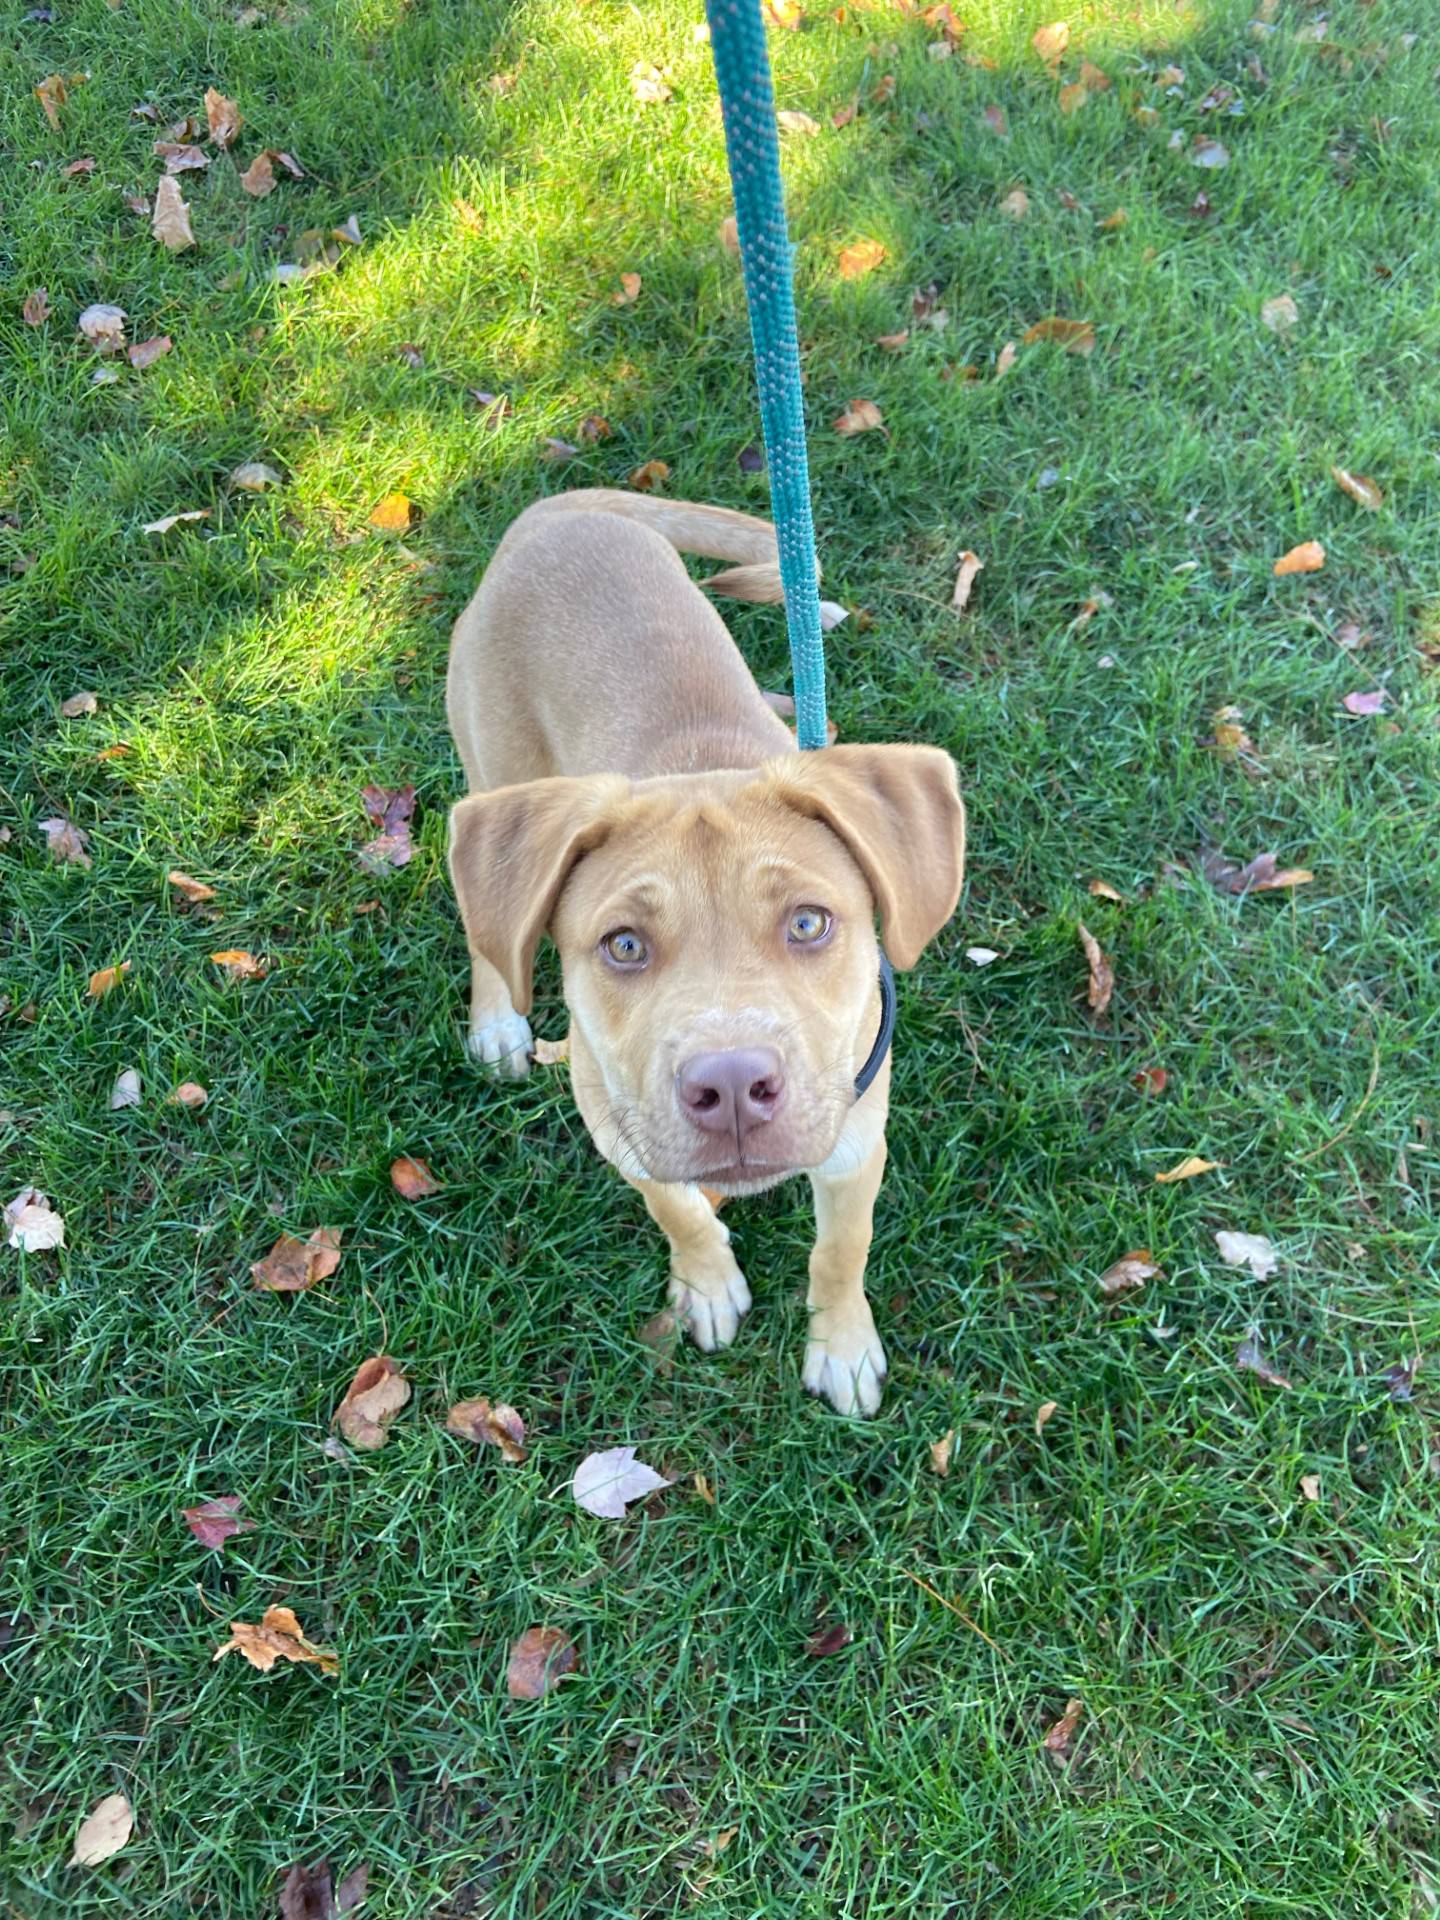 Chico is a happy 8-month-old Lab mix that was rescued from a local animal control. He just wants love and affection from everyone he meets. He is super playful and energetic. He is eager to please and needs some training. To meet Chico, email Dogadoption@nawsus.org. Visit nawsus.org.